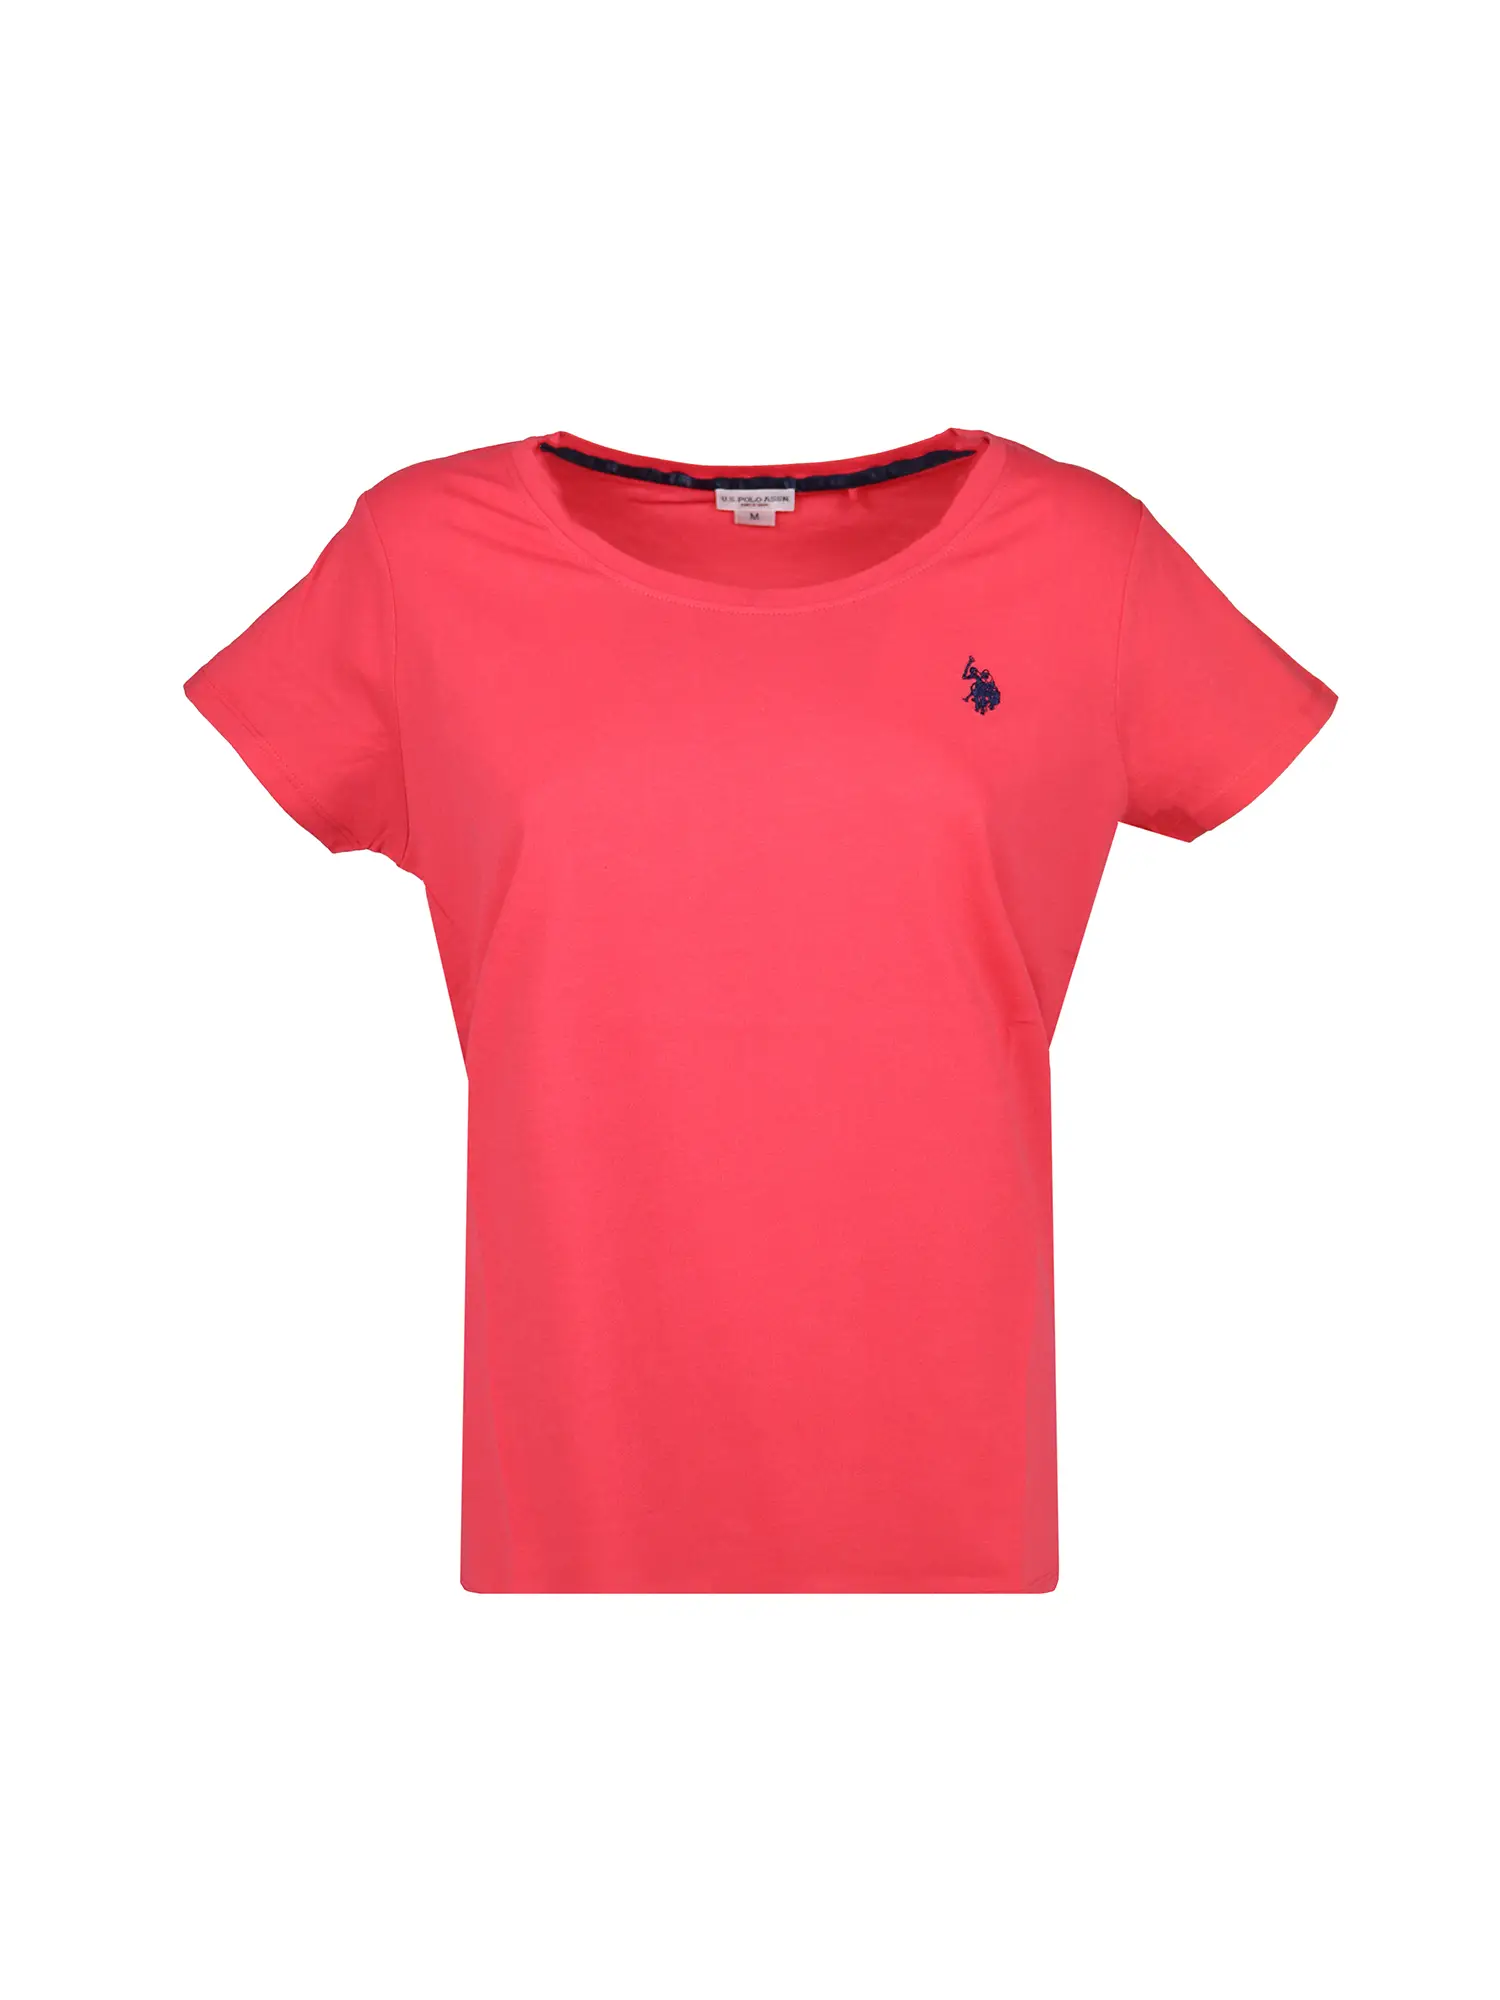 T-SHIRT DONNA - US POLO ASSN. - 67335 - ROSSO, XS